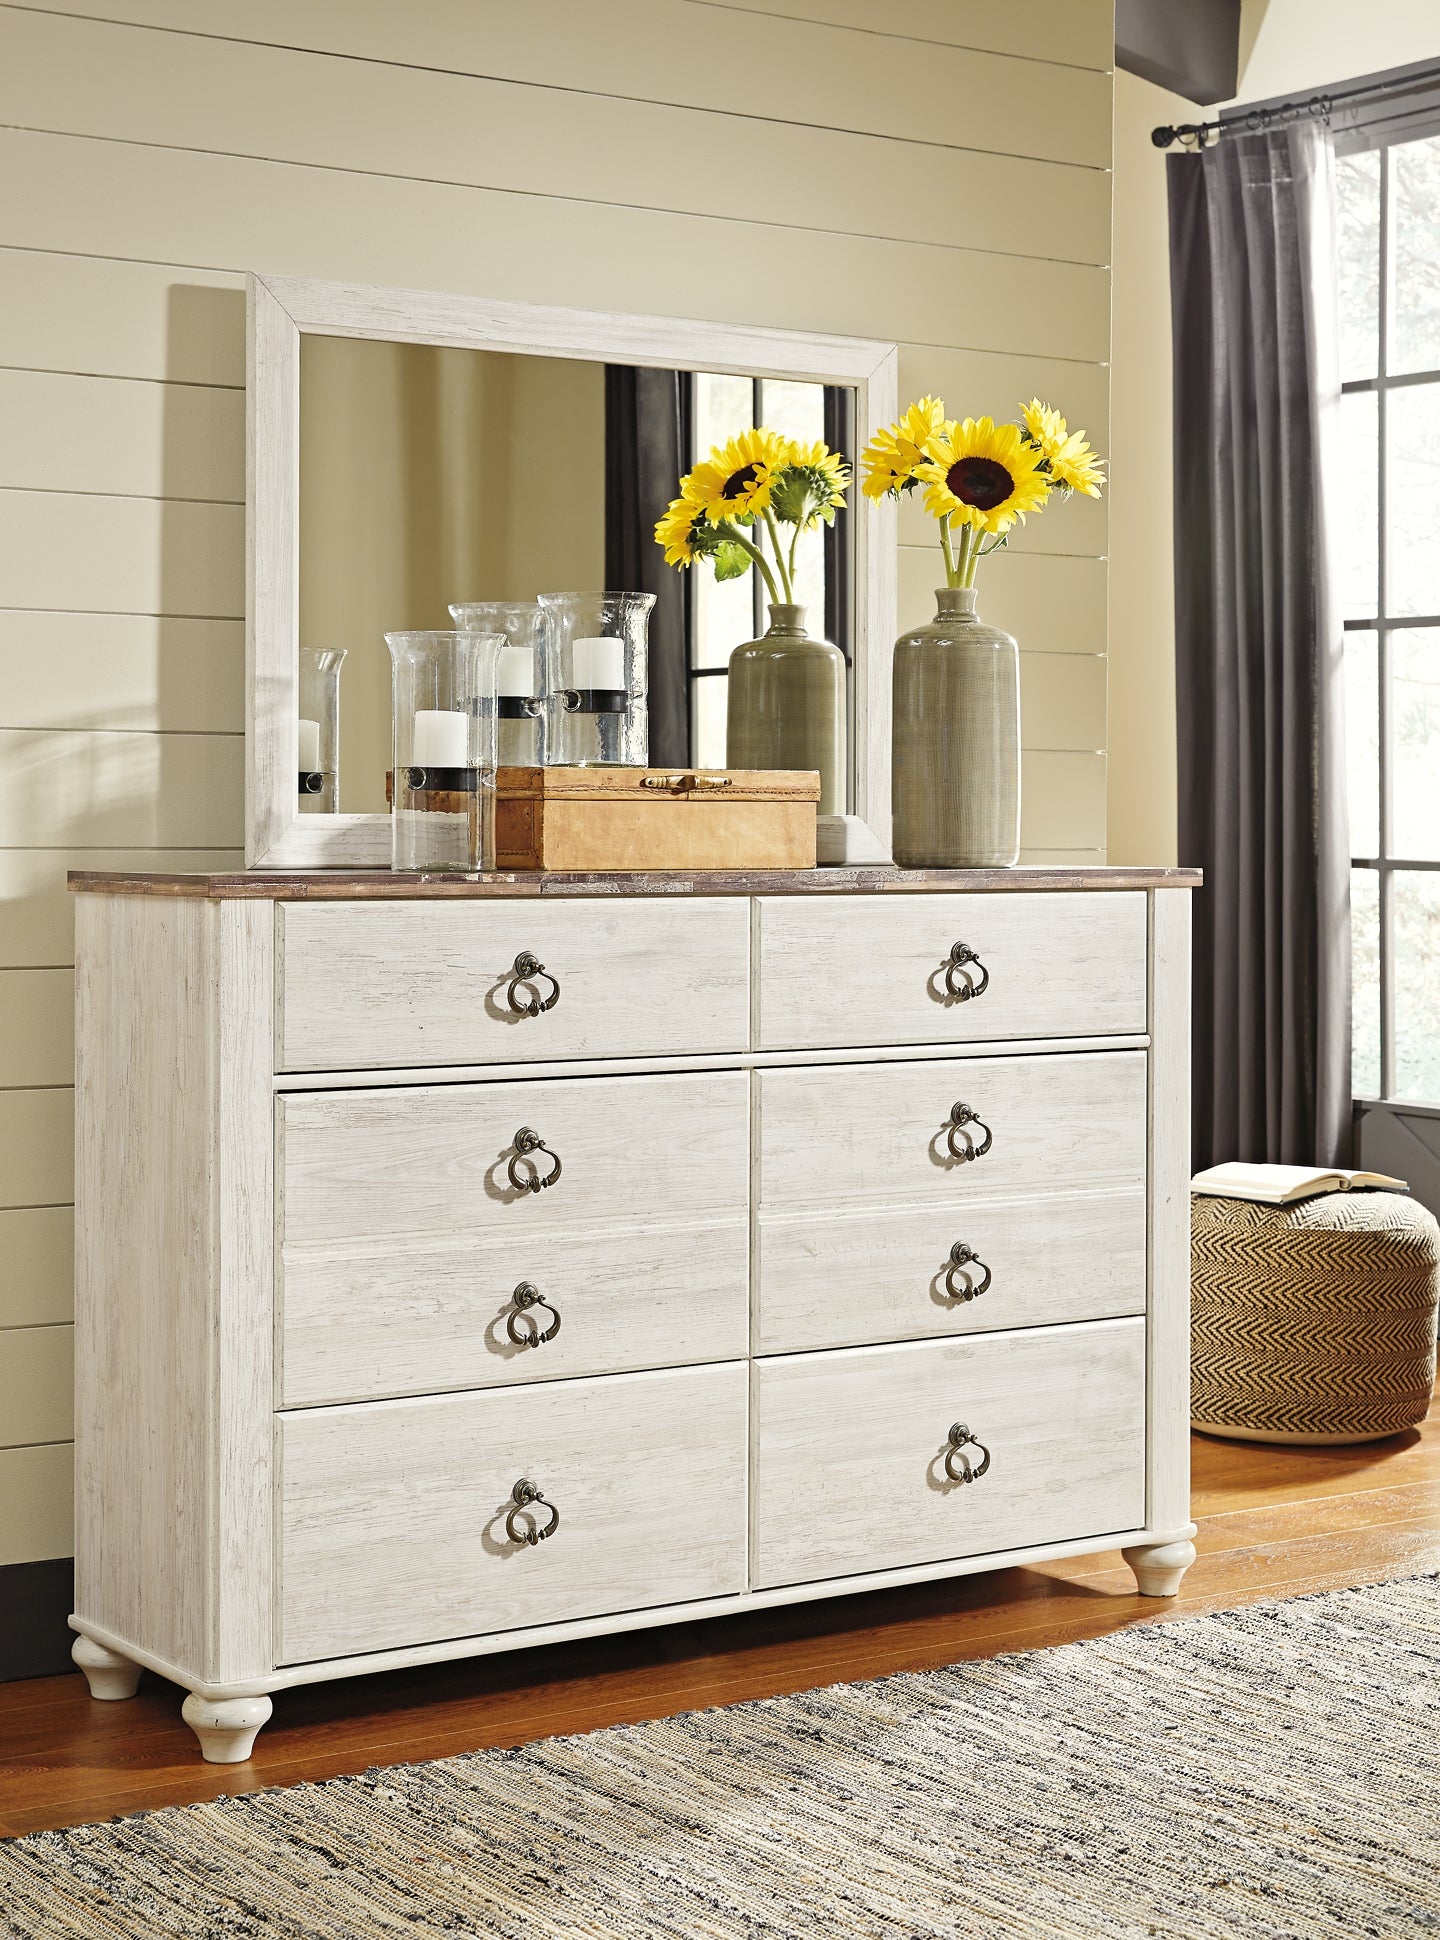 Willowton King Panel Bed with Mirrored Dresser